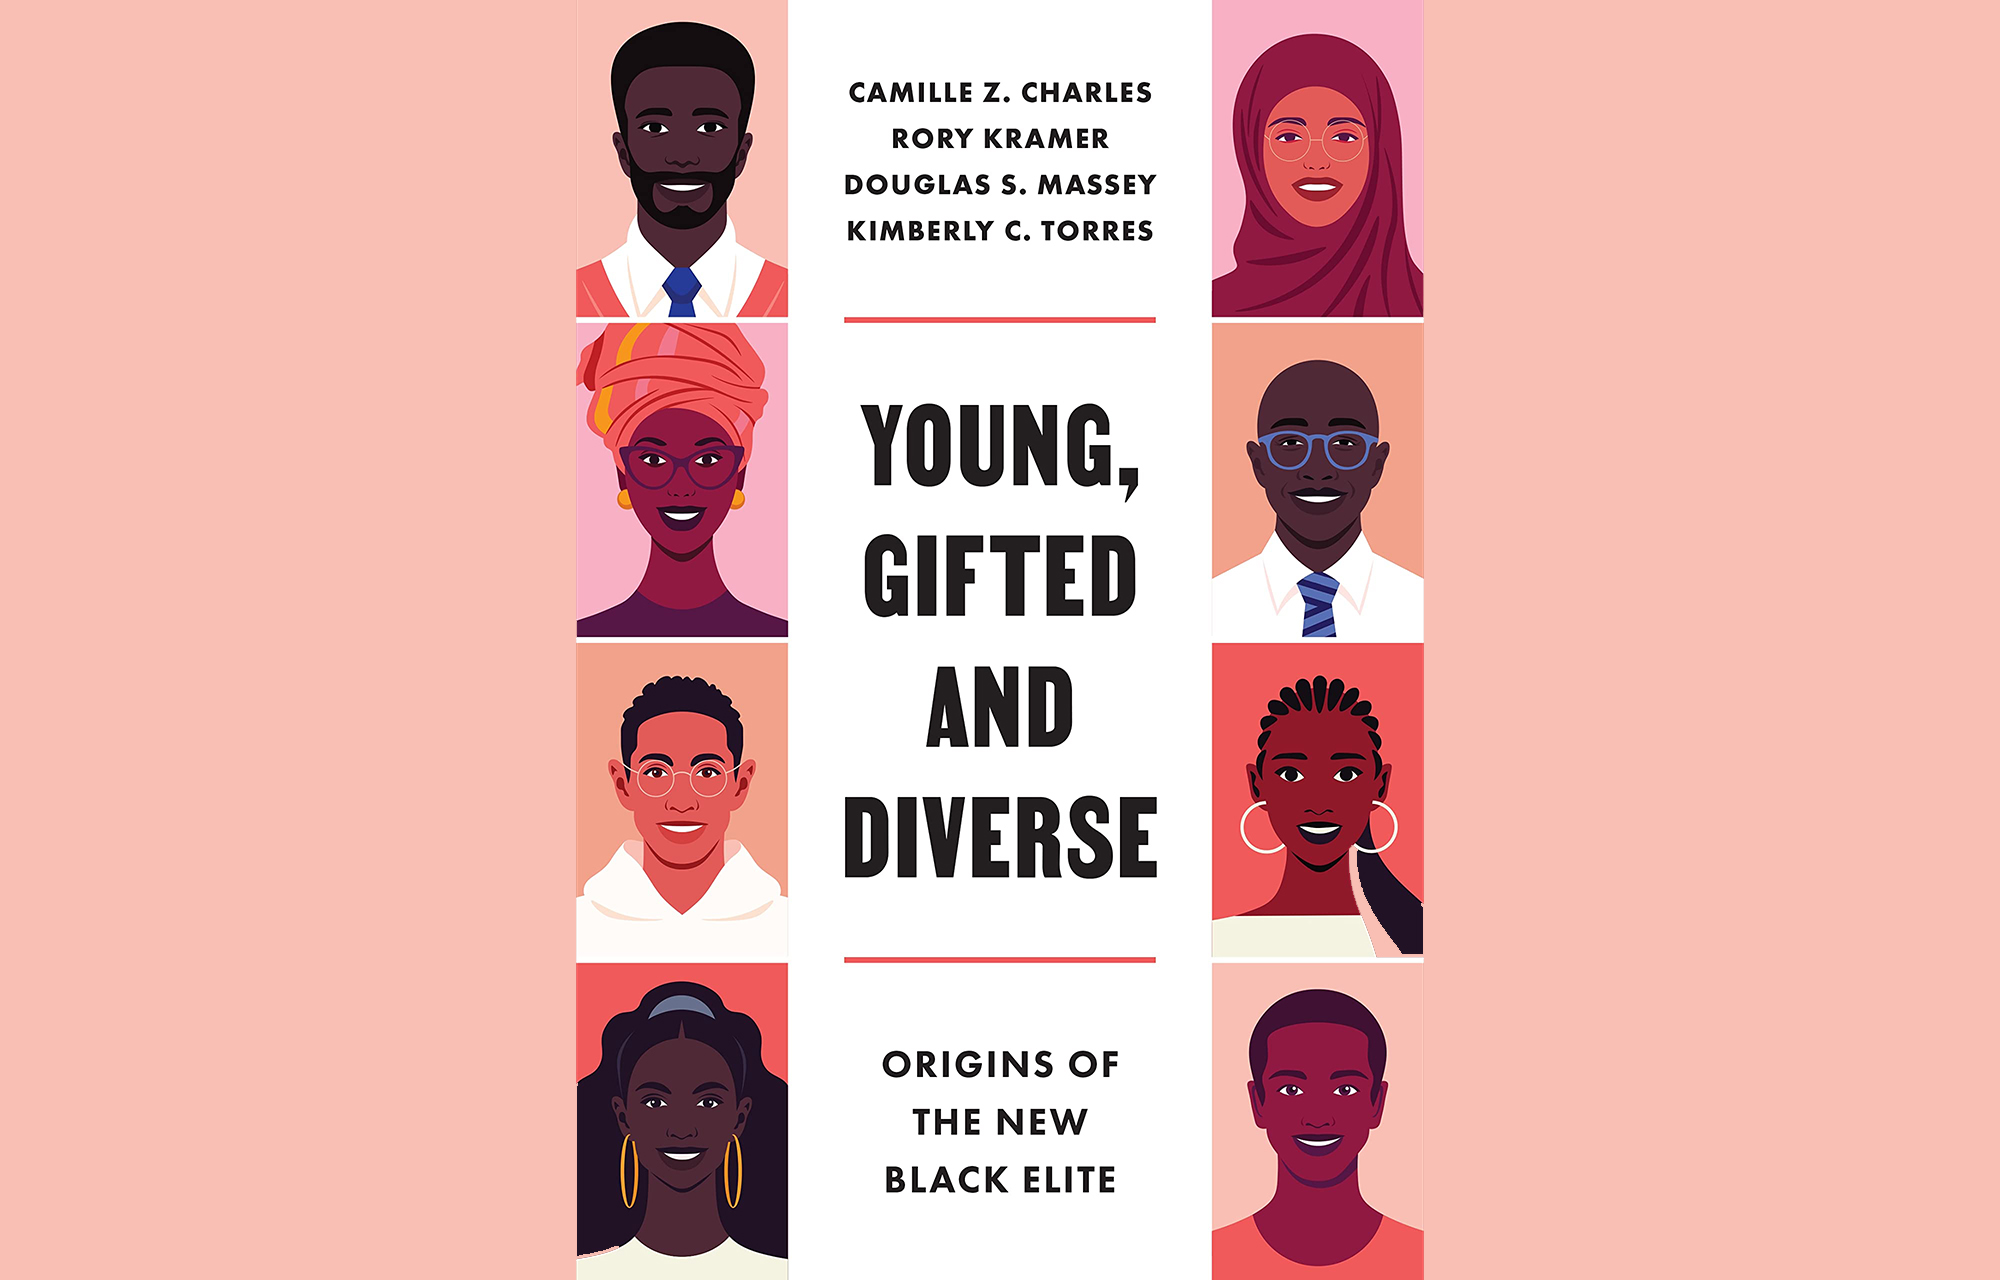 A book cover reading, "Young, Gifted, and Diverse: Origins of the New Black Elite," by Camille Z. Charles, Rory Kramer, Douglas S. Massey, Kimberly C. Torres. To the right and left of the text are four rectangular boxes with illustrations of diverse Black folks.